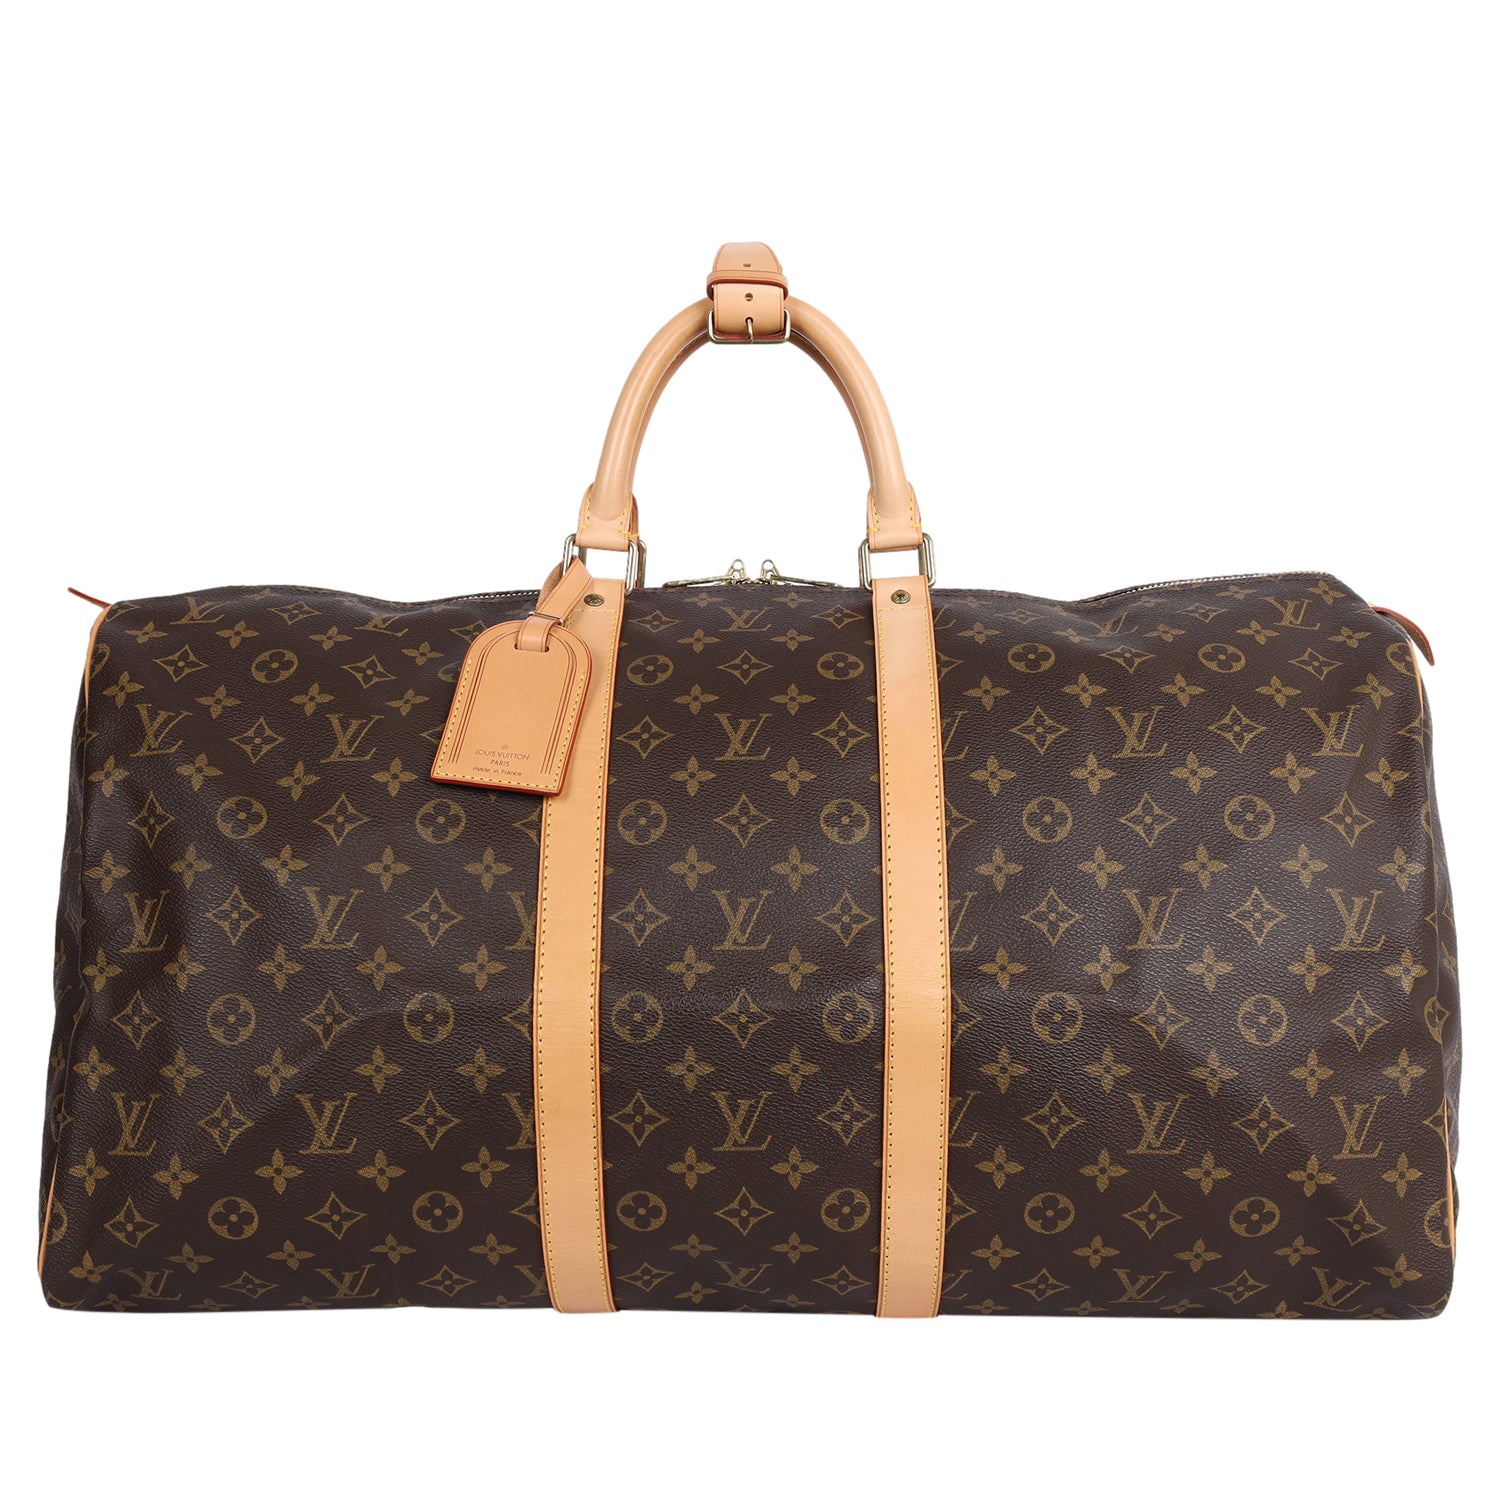 Louis Vuitton Keepall 45 Travel Bag in Gold Epi Leather